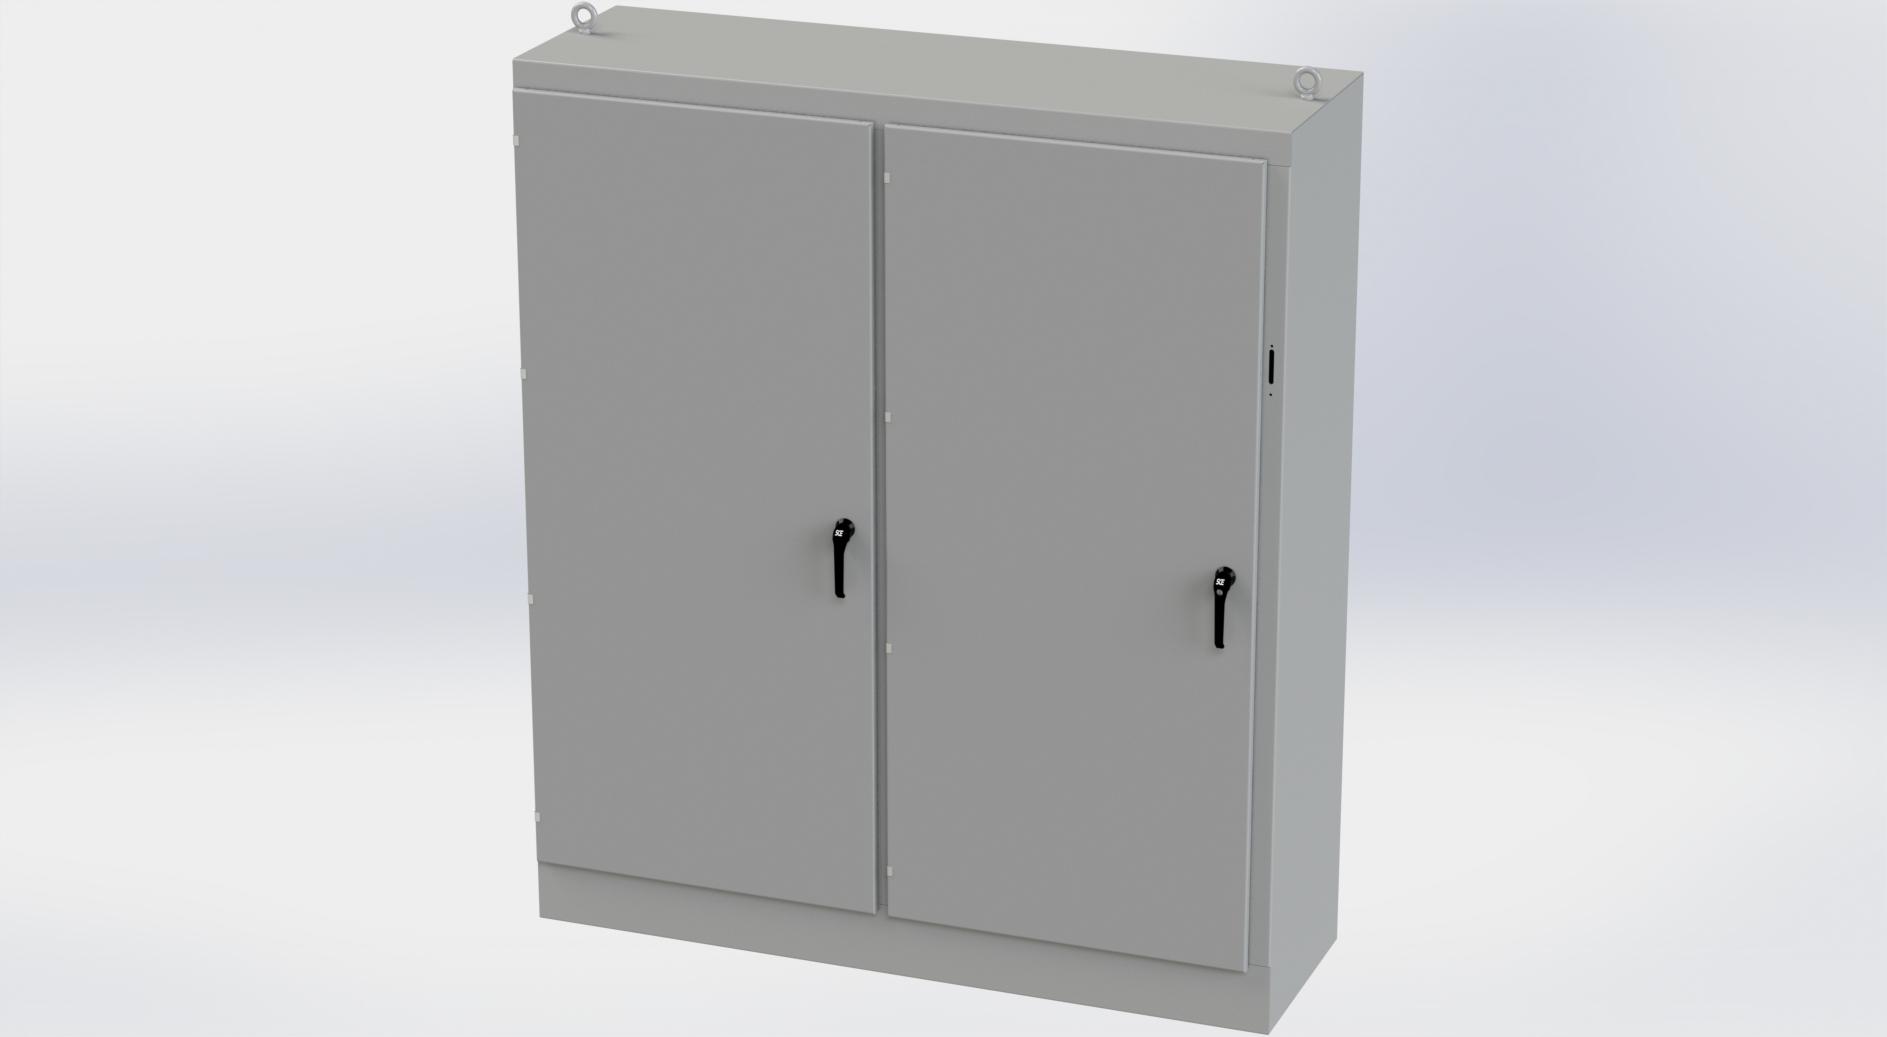 Saginaw Control SCE-90XM7824G 2DR XM Enclosure, Height:90.00", Width:77.75", Depth:24.00", ANSI-61 gray powder coating inside and out. Sub-panels are powder coated white.